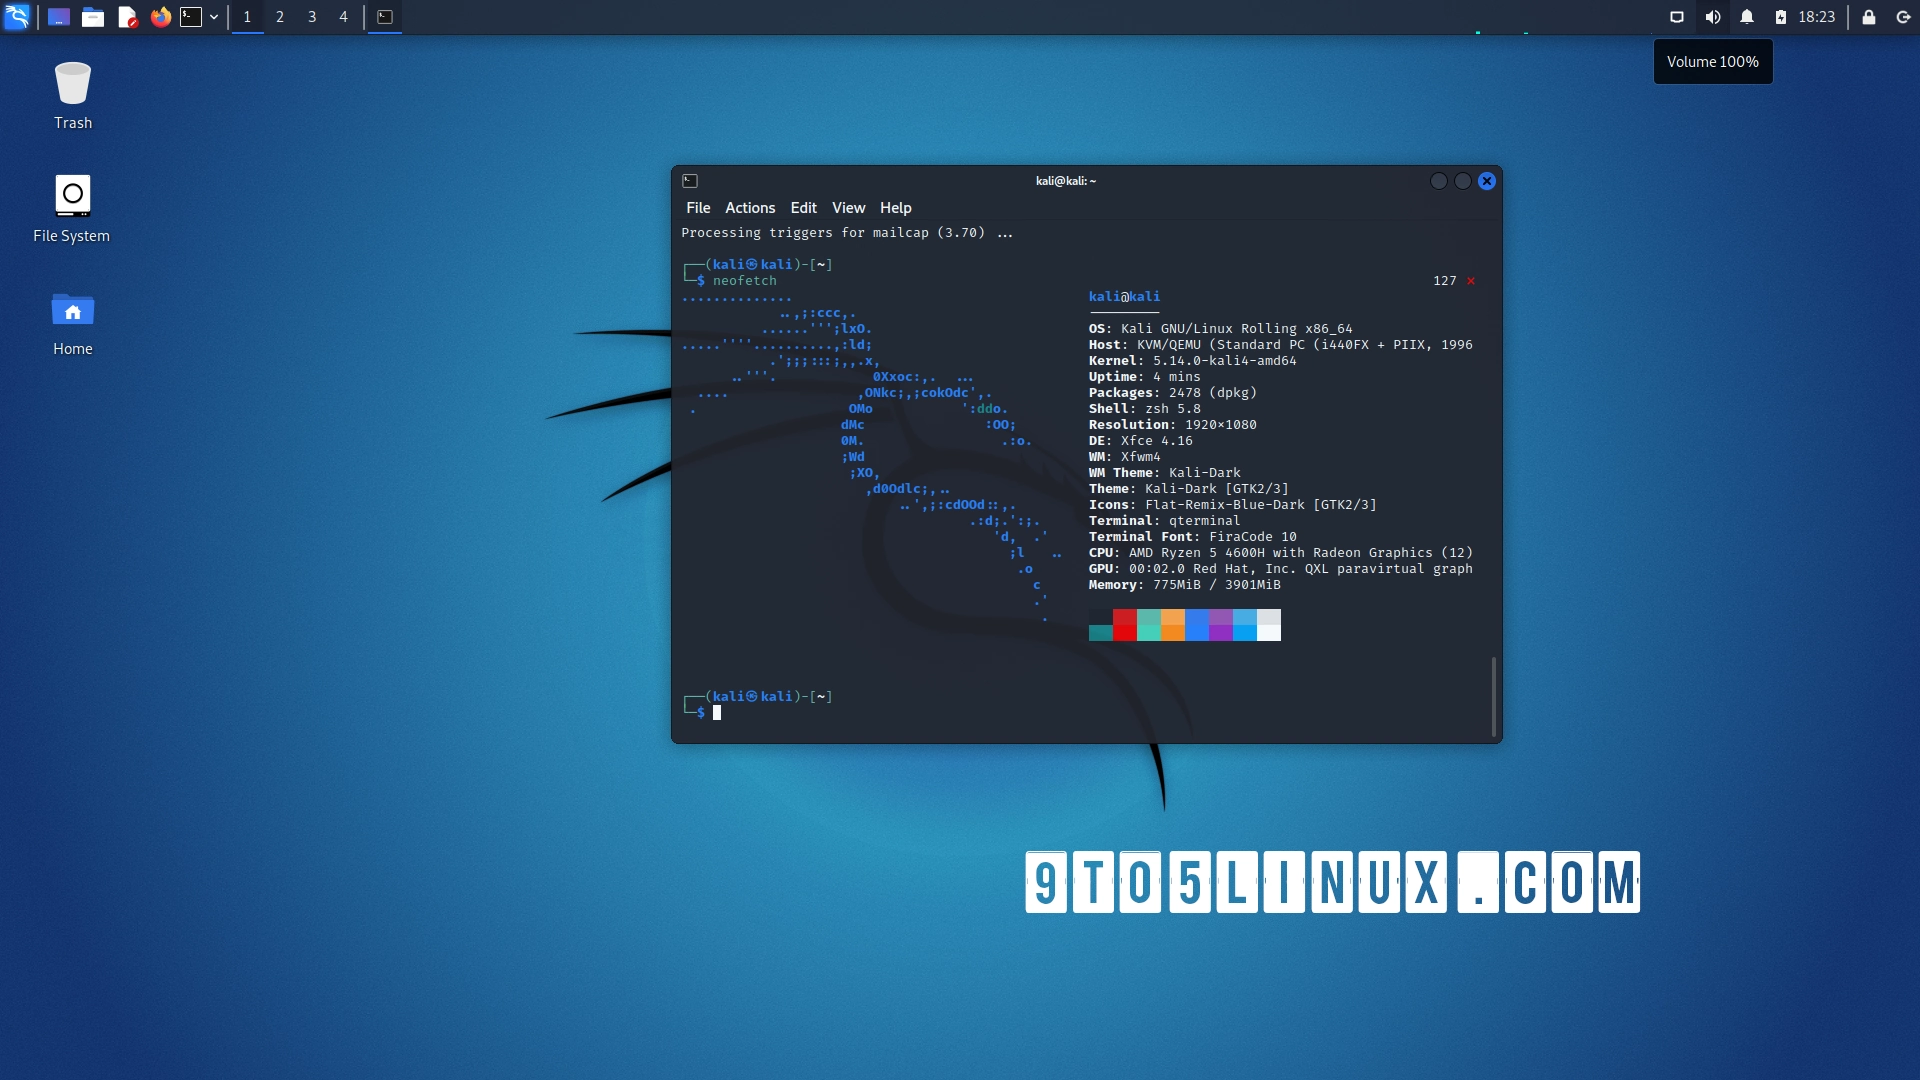 Kali Linux 2021.4 Released with Raspberry Pi Zero 2 W Support, GNOME 41, and New Hacking Tools